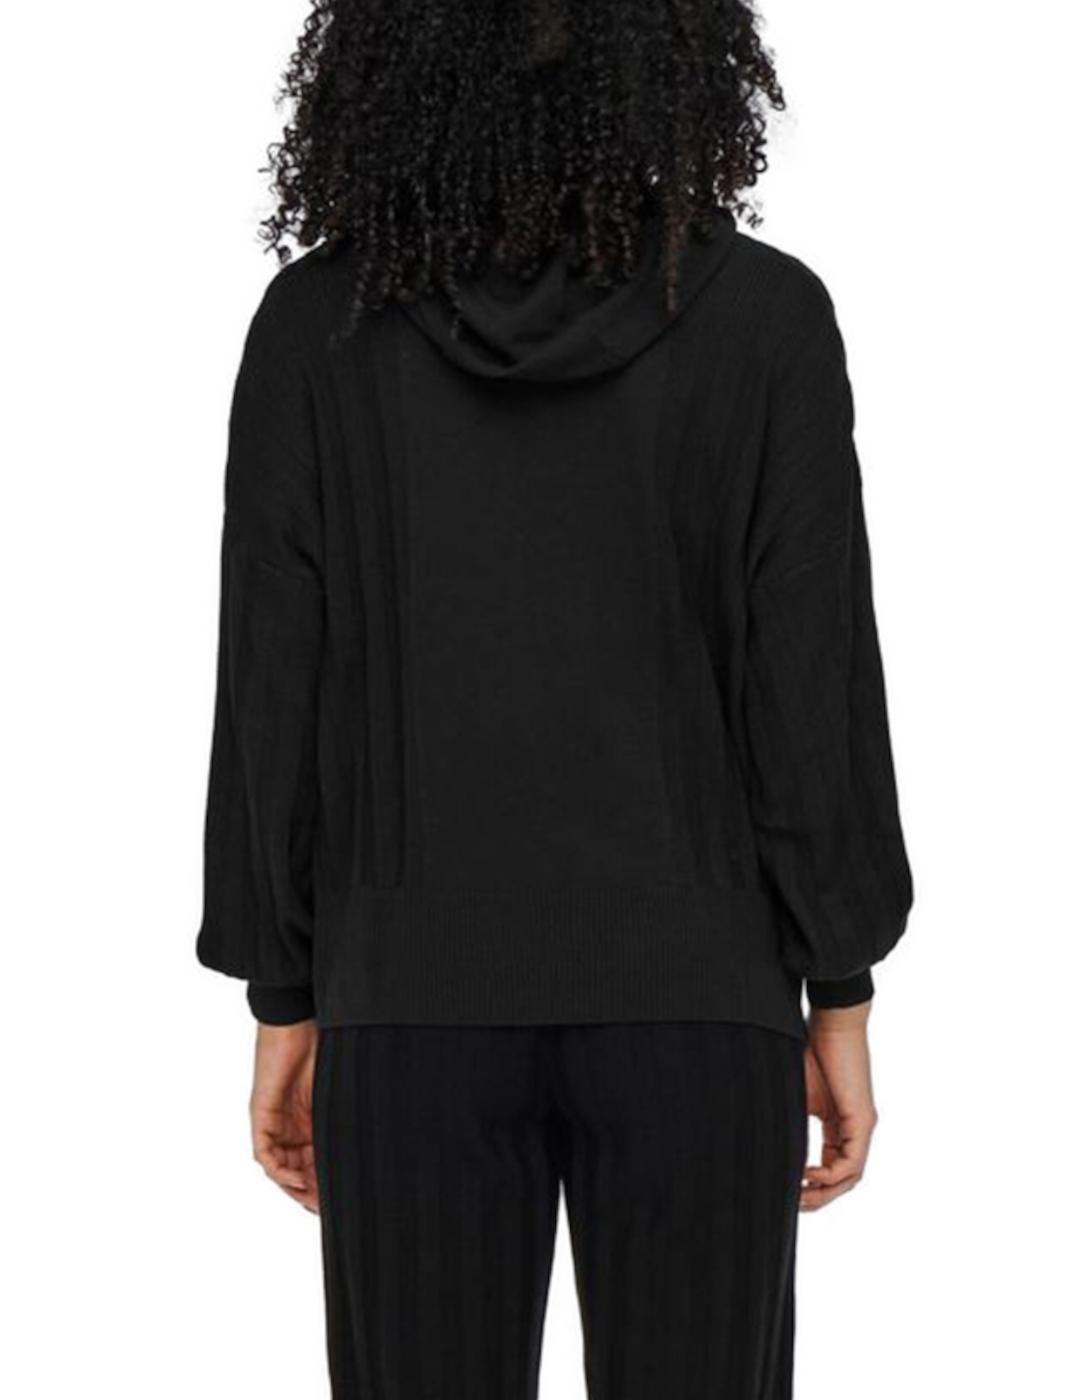 Jersey Only new Tessa negro para mujer-z